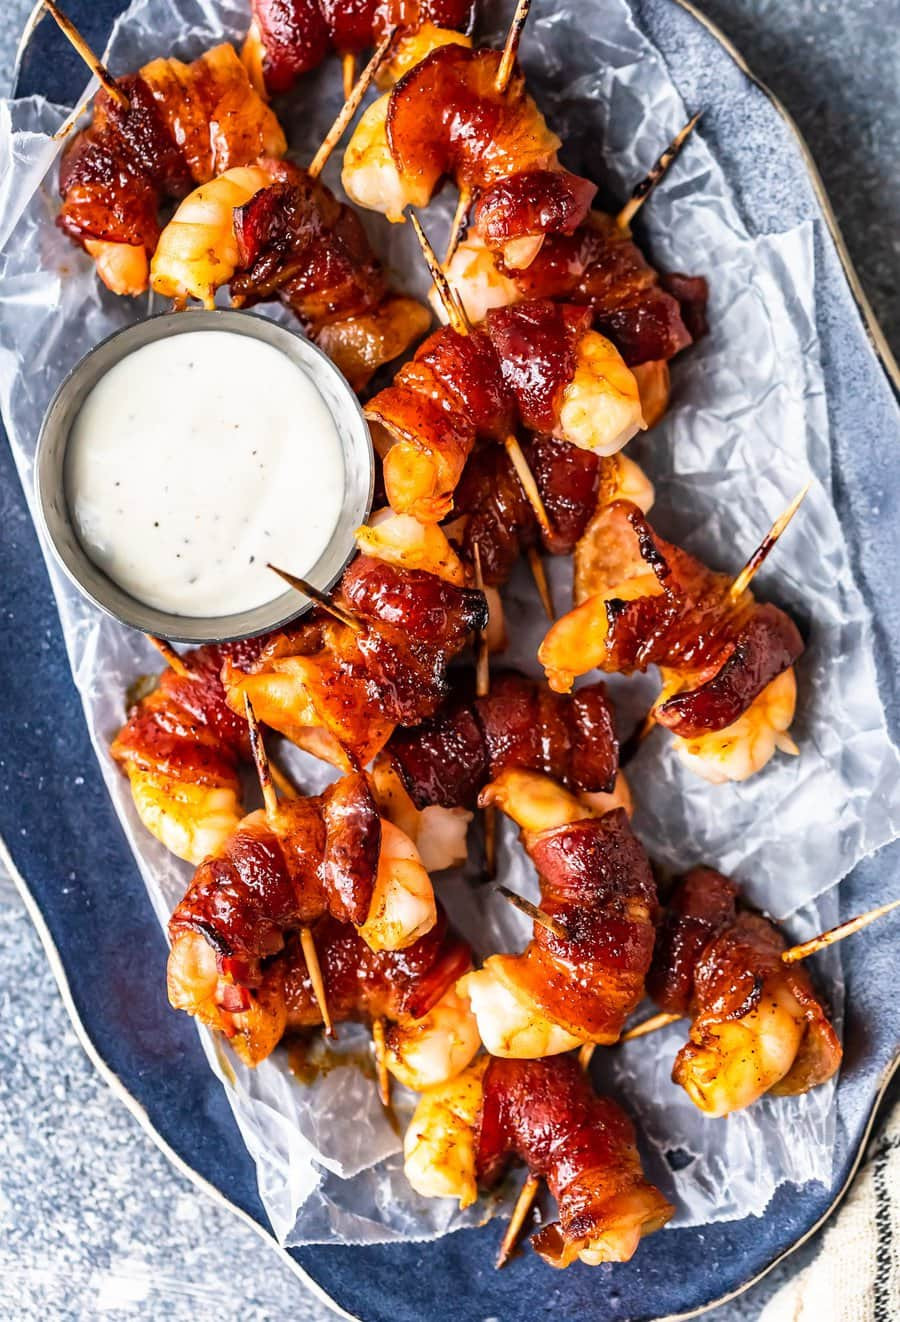 15 Bacon Wrapped Shrimp Appetizers
 Anyone Can Make